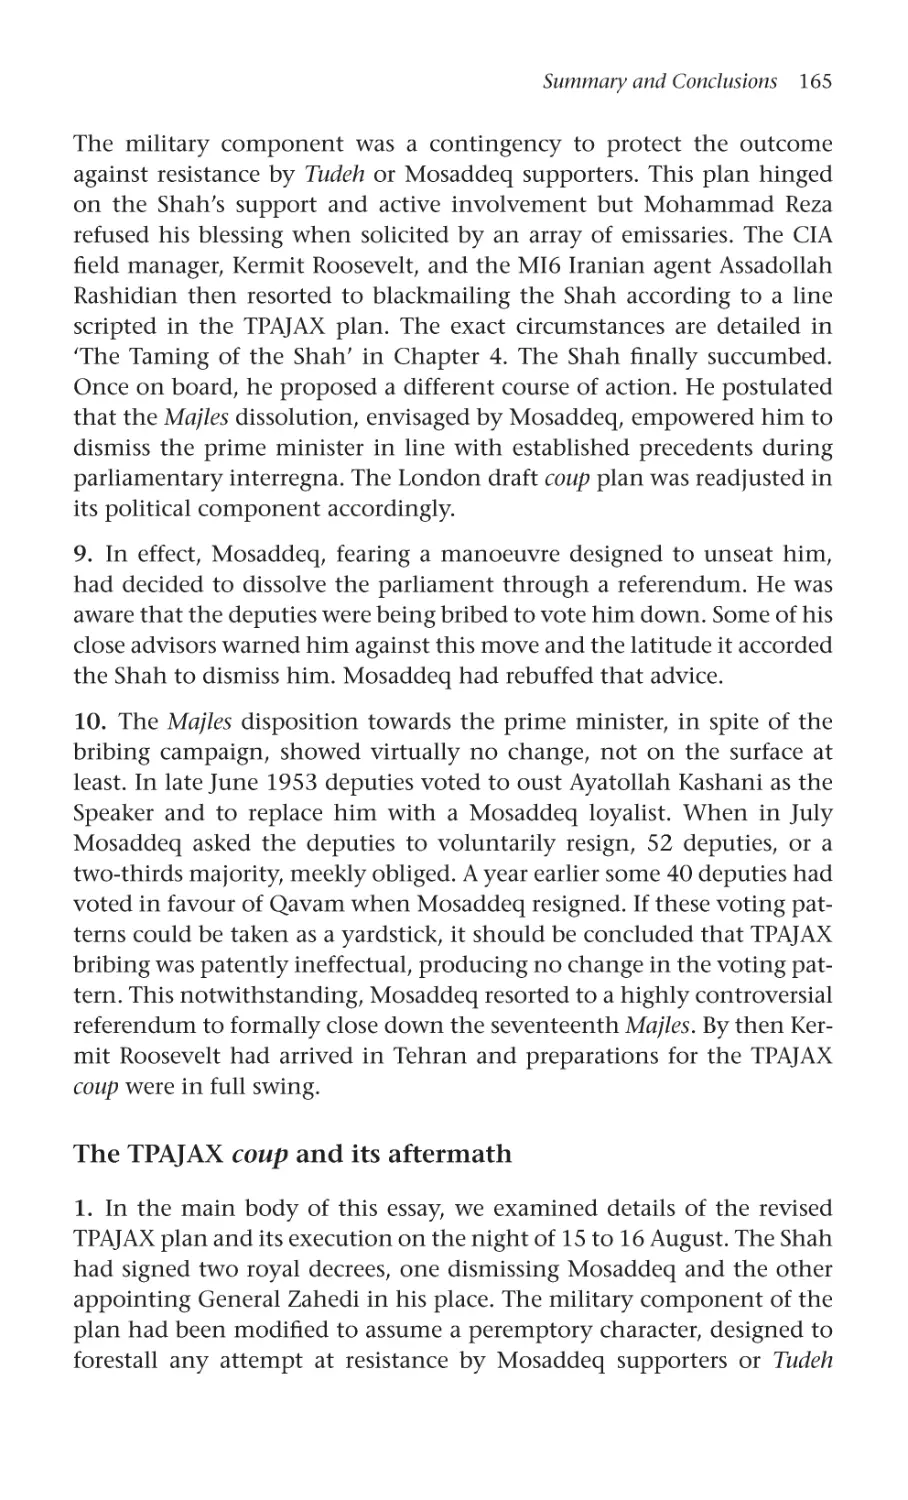 The TPAJAX coup and its aftermath